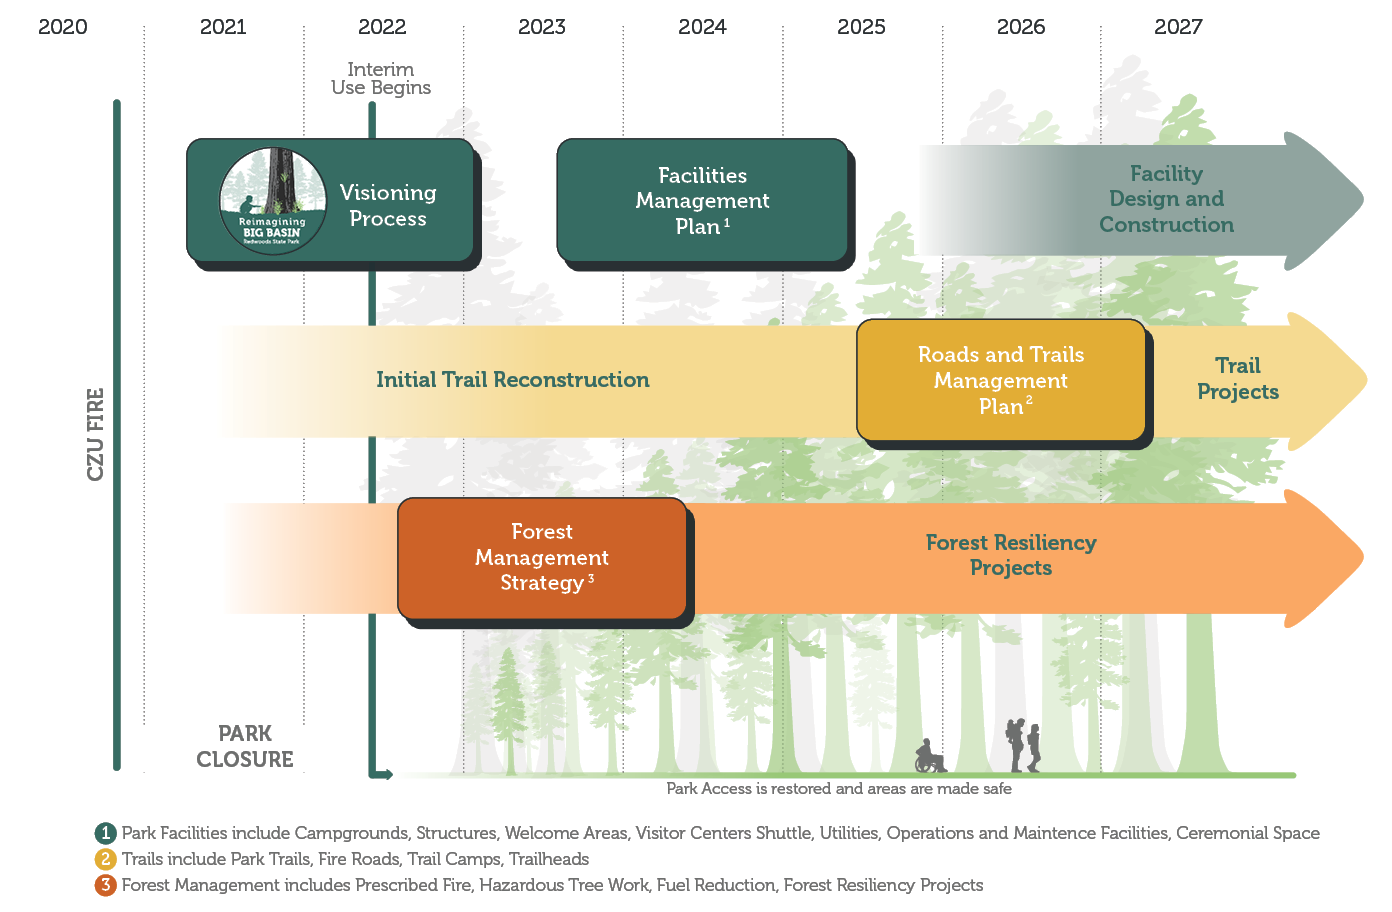 Timeline showing the activities in Big Basin, starting with the CZU fire towards the end of 2020. Between then and mid-2022 is the park closure, then Interim Use Begins. Beginning in early 2021 is a box for the Visioning Process that stretches to early 2023. Heading right along the timeline is a box for the Facilities Management Plan, from mid 2023 to mid 2025. After that is an arrow for Facility Design and Construction that stretches from late 2025 to beyond 2027. Going back to the beginning of the timeline is the Trail Reconstruction arrow that moves forward through Roads and Trails Management Plan from 2025 to 2027 into Trail Projects in 2027 and beyond. The third and final arrow is Forest Resiliency Projects, which stretches from mid 2021 beyond 2027. This includes a box for Forestry Management Strategy from mid 2022 to mid 2024.